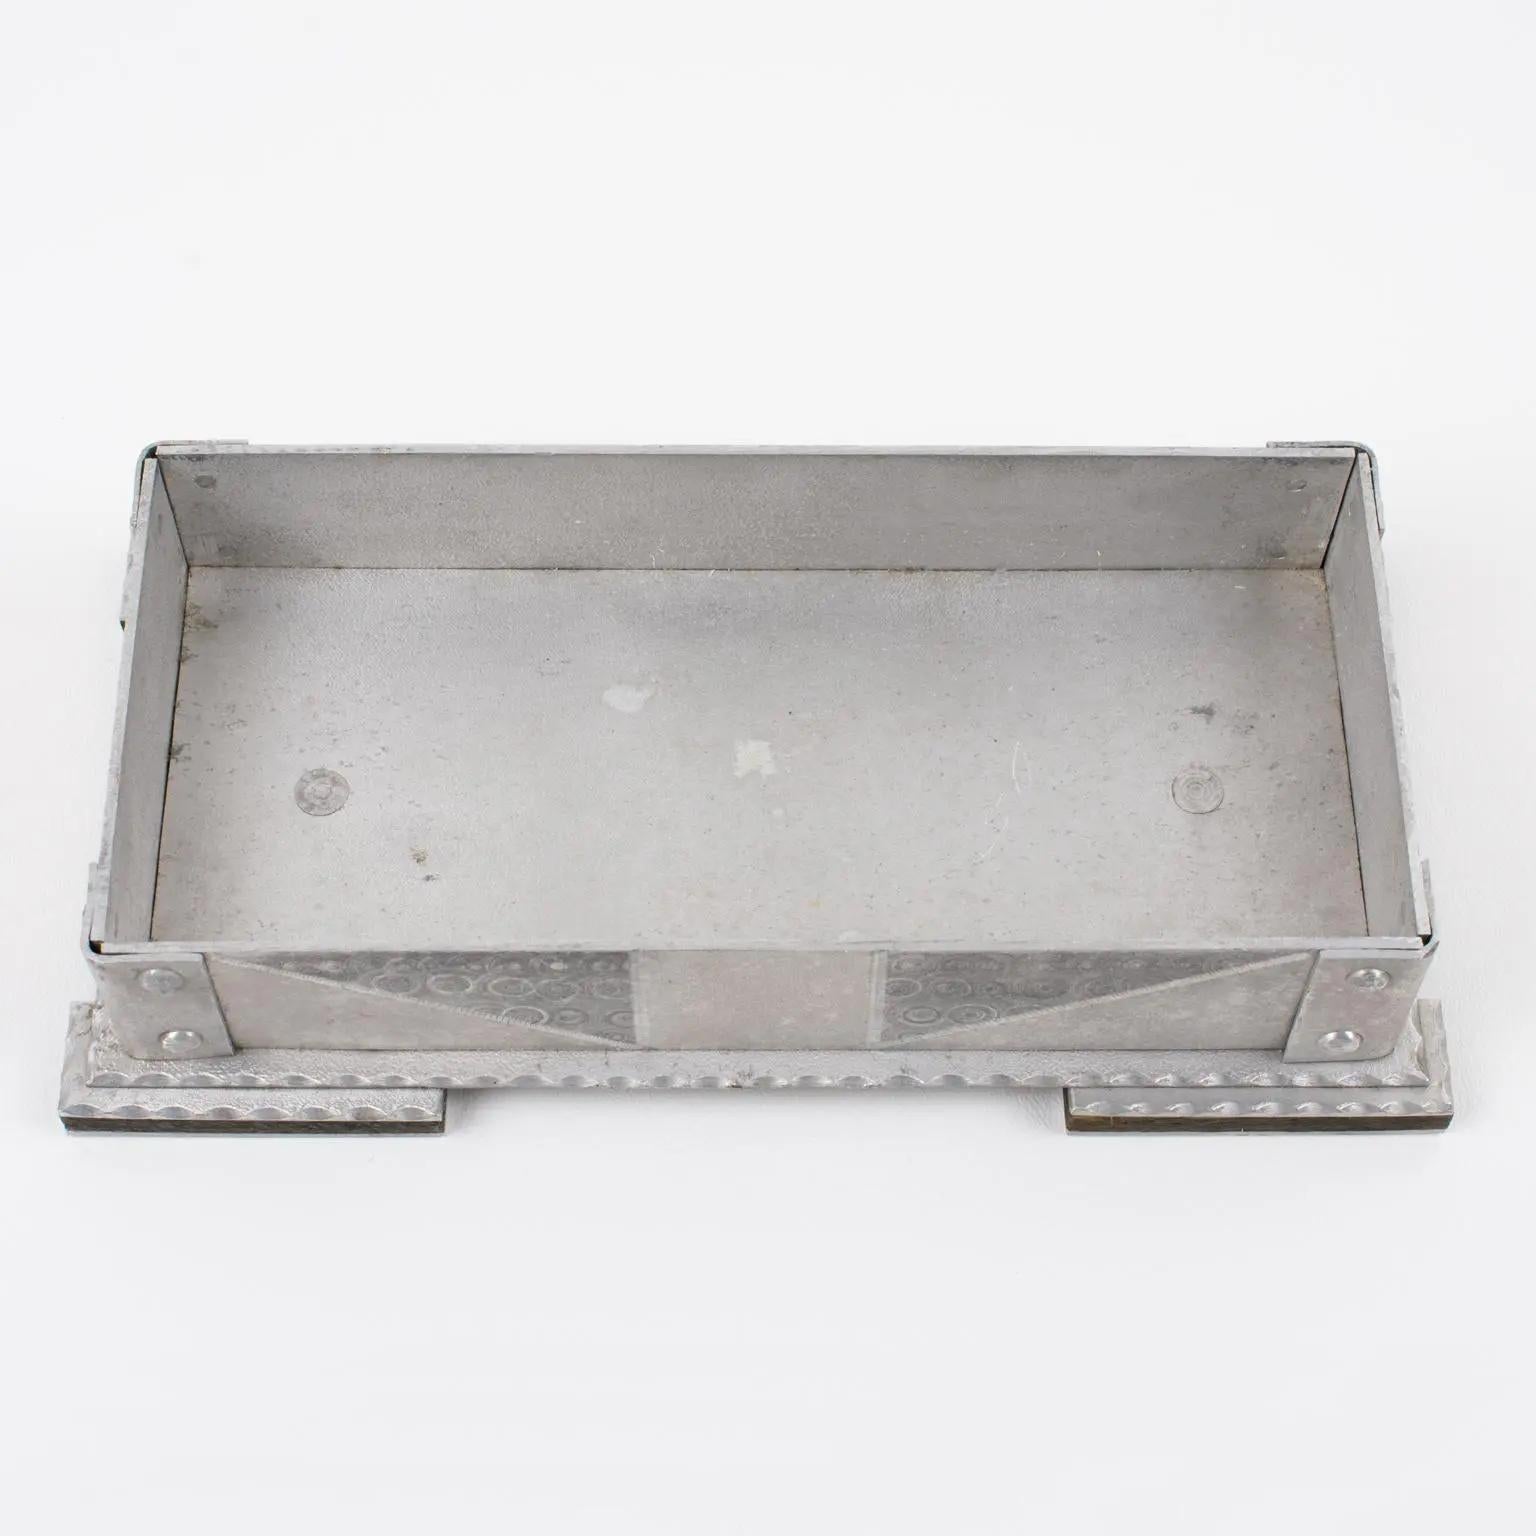 Bauhaus Arts and Crafts Industrial Textured Aluminum Box, 1920s For Sale 3